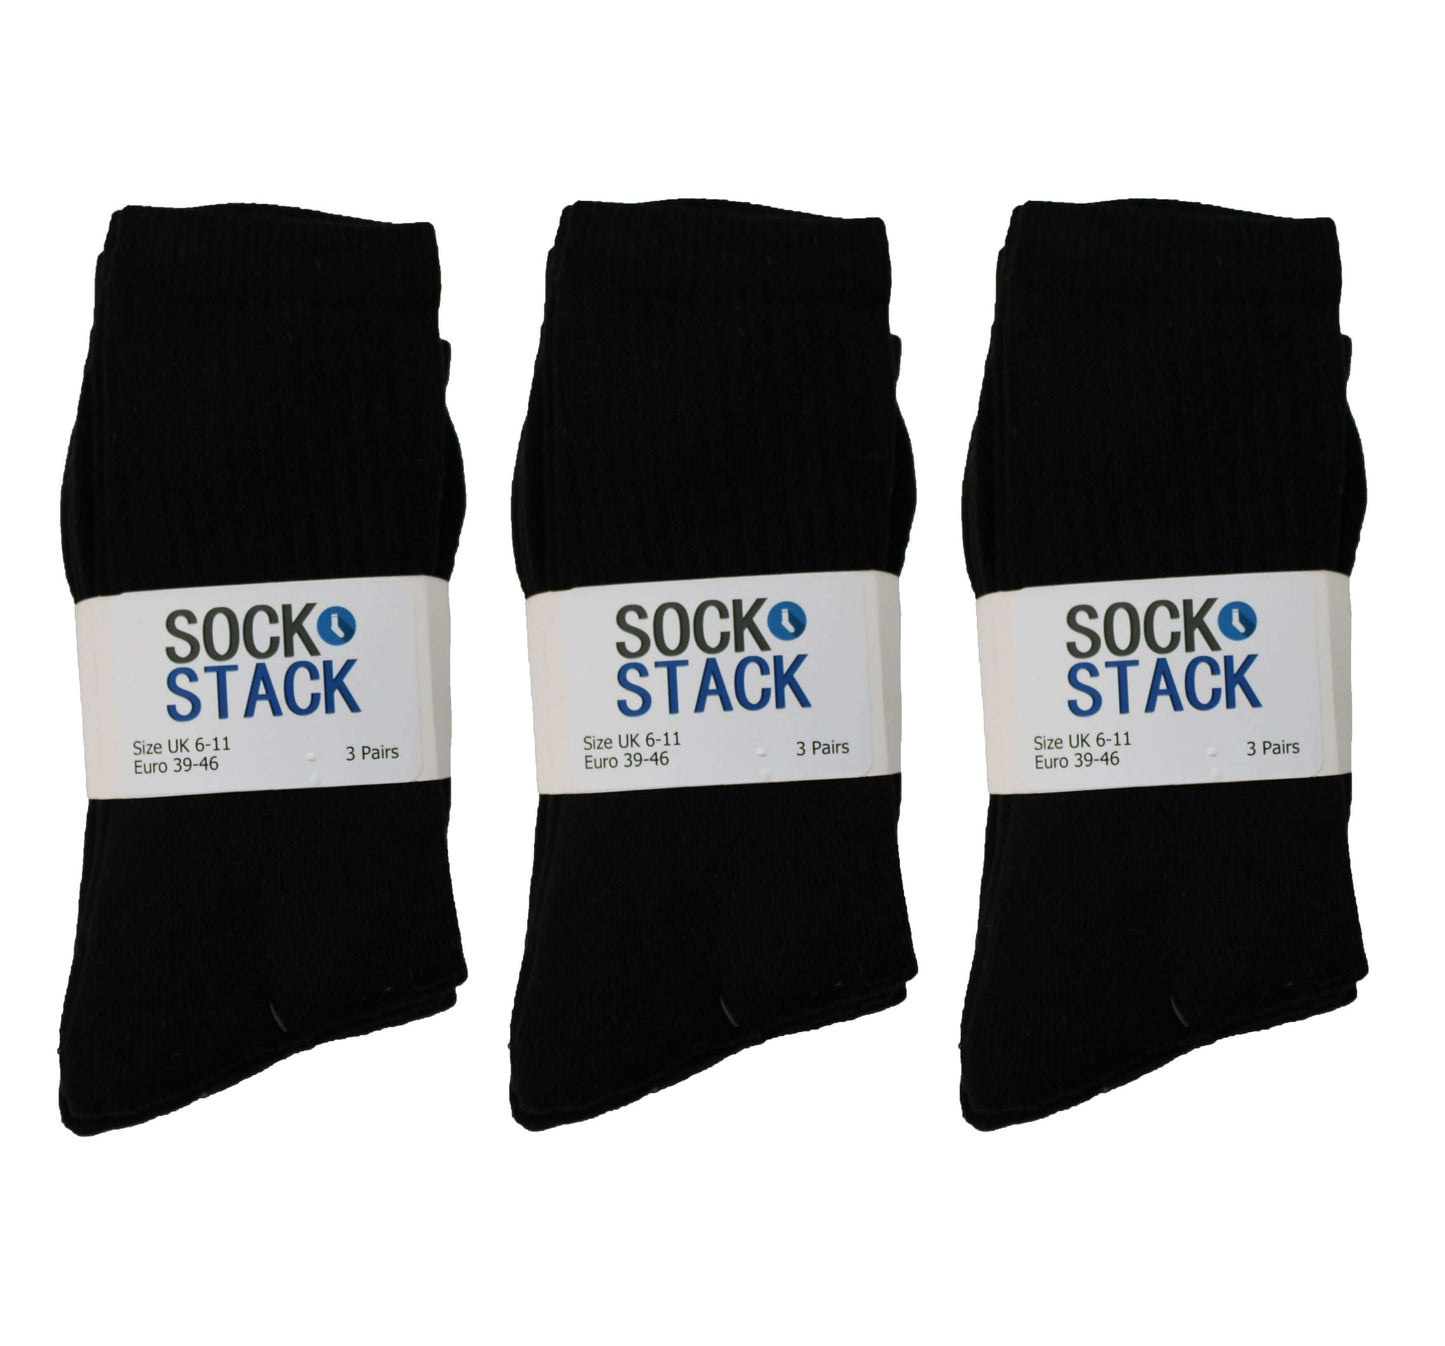 15 Pairs Of Men's Sport Socks, Black White Blue Grey Cotton Rich Performance Socks. Buy now for £8.00. A Socks by Sock Stack. 6-11, assorted, black, blue, boot, boys, comfortable, cosy, cotton, cushion sole, grey, grey socks, mens, office, running, socks,